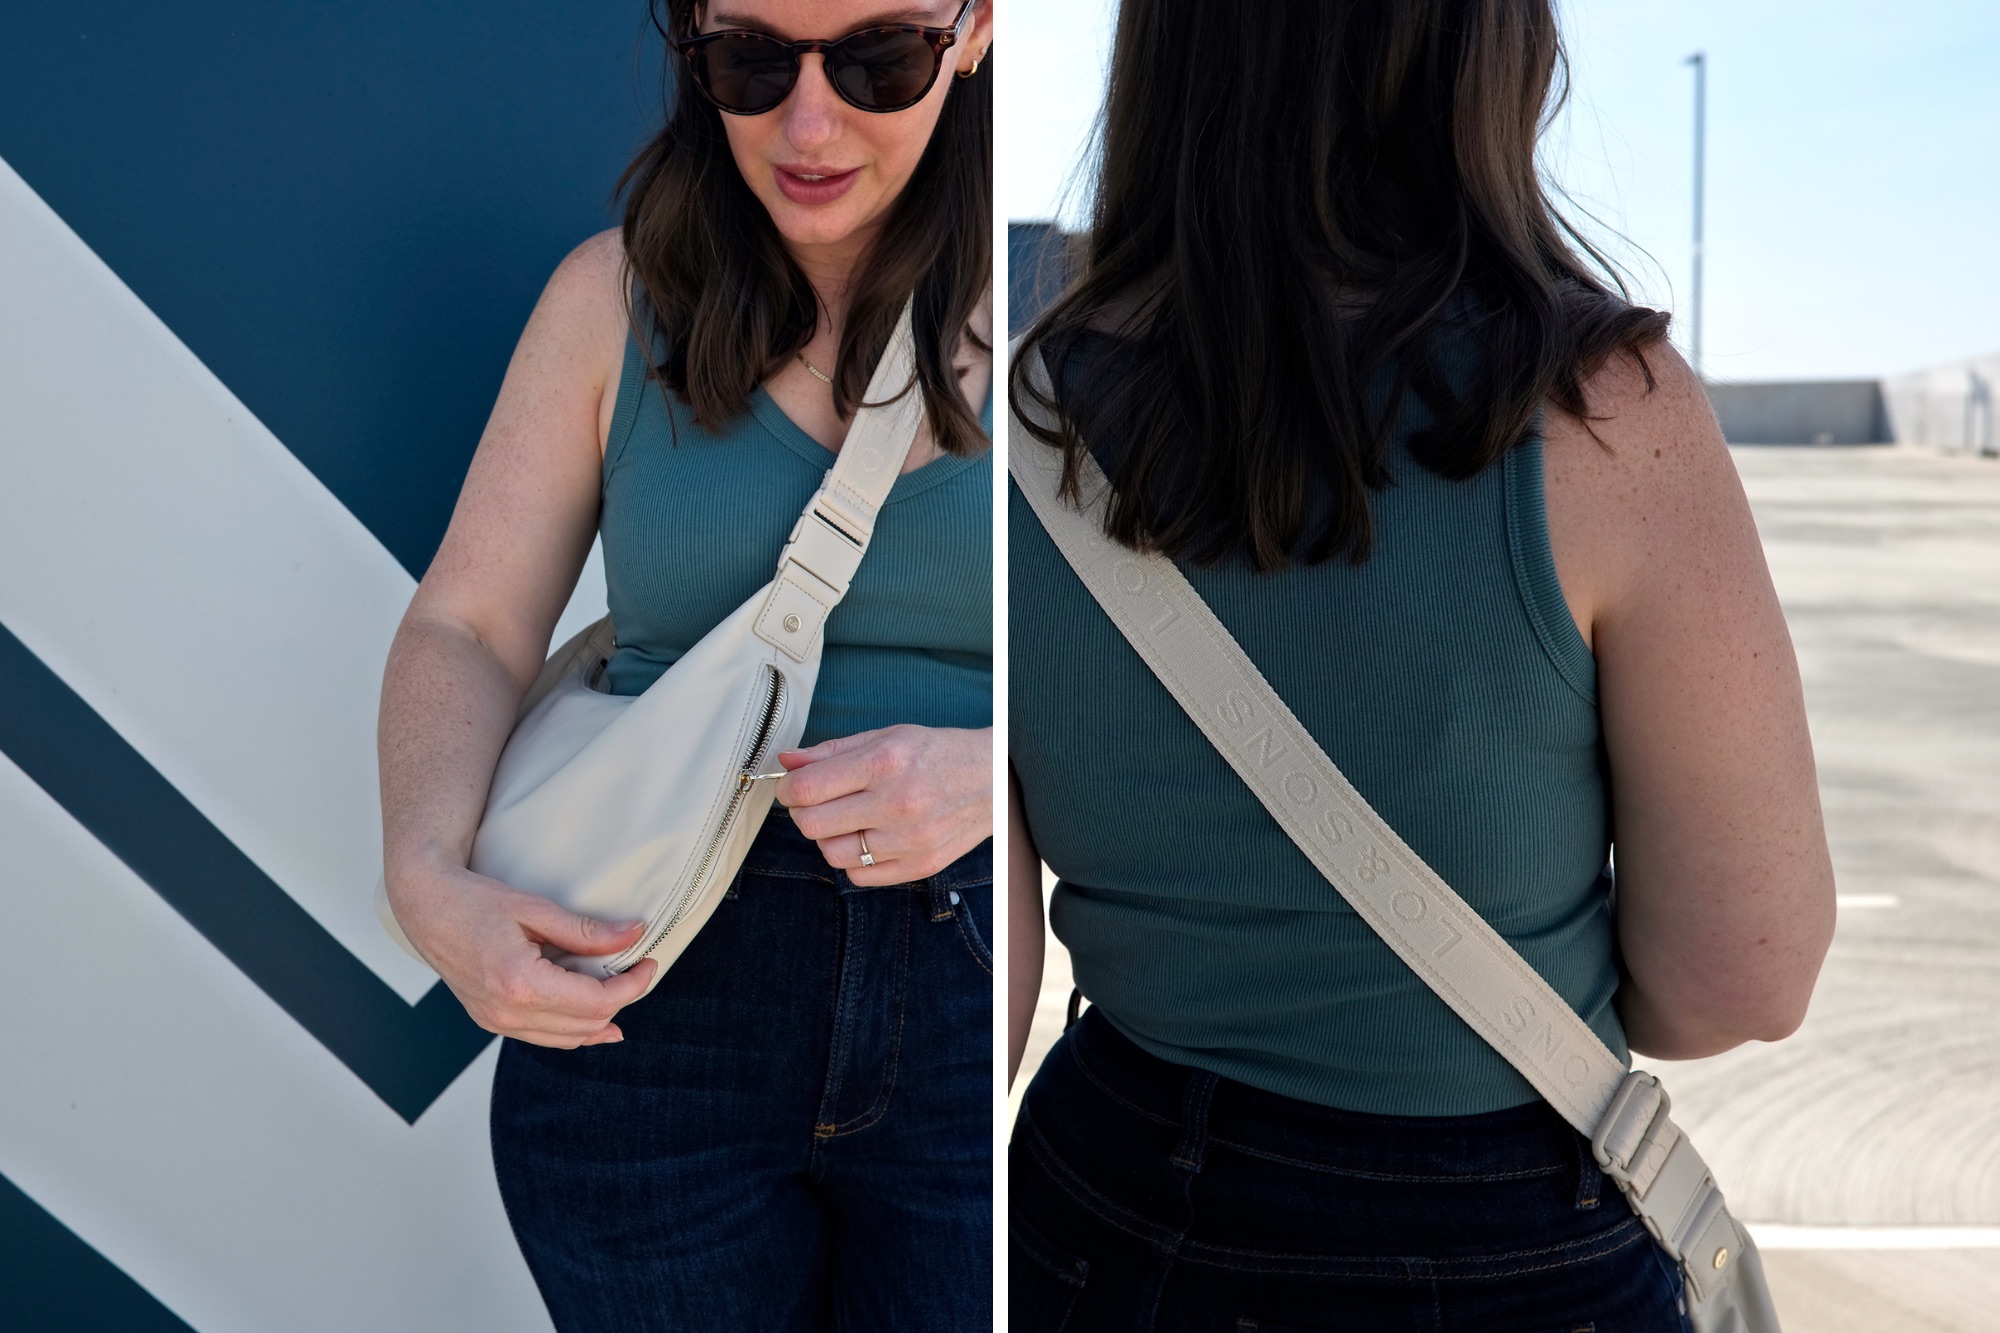 Alyssa shows the front pocket and strap of the Aoyama Bag 